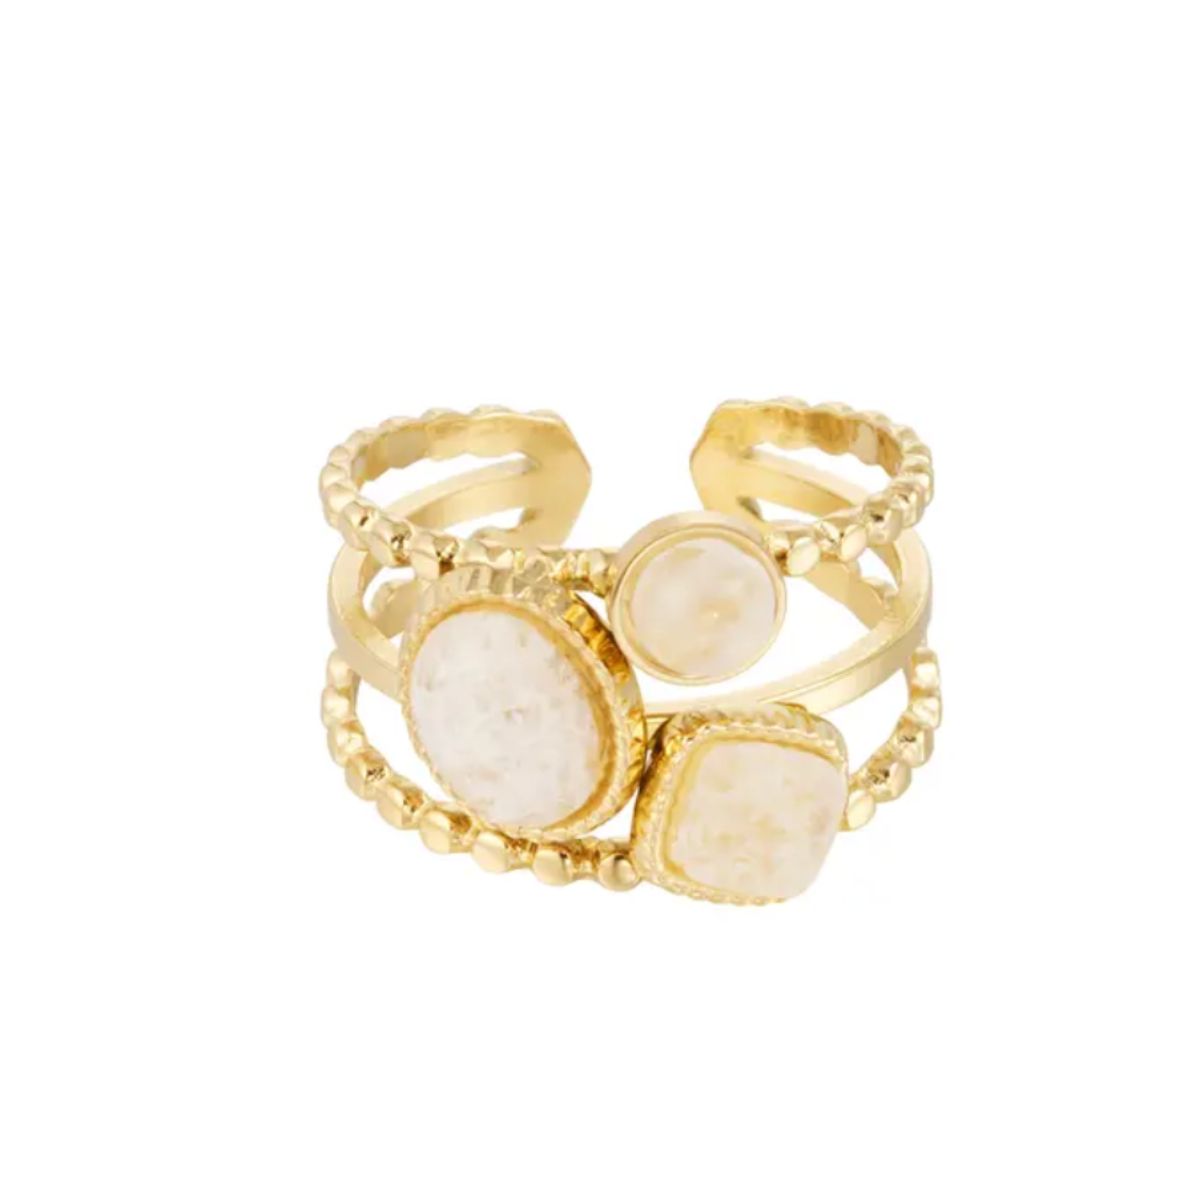 Three-white-stone-ring-in-gold